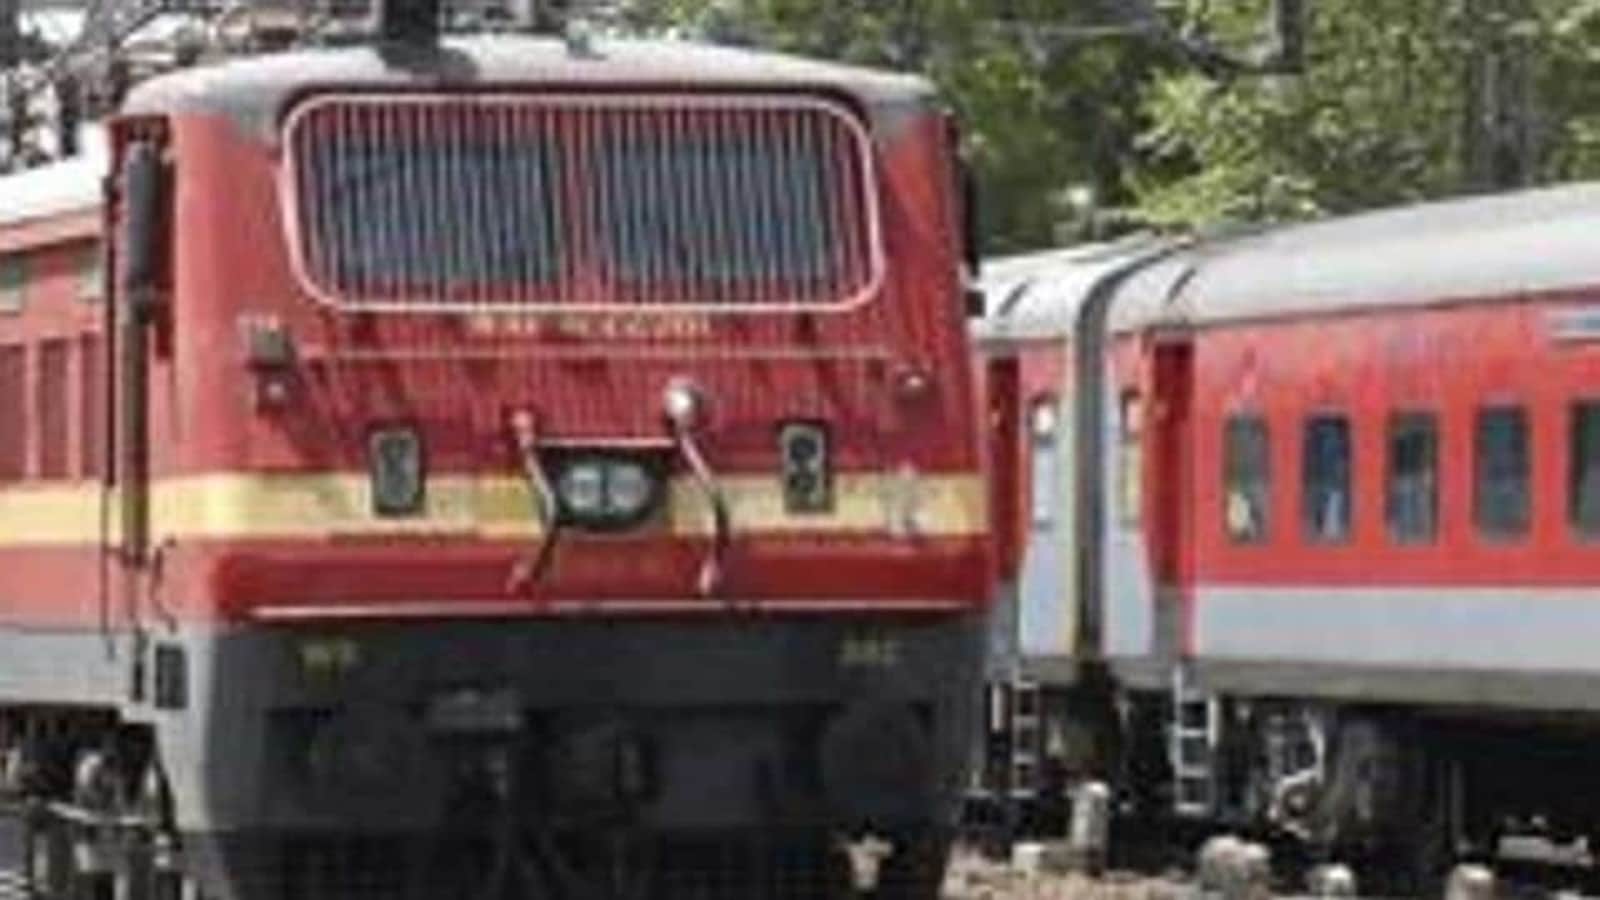 Northern Railway Recruitment 2021: Apply for 3093 vacancies for apprentices